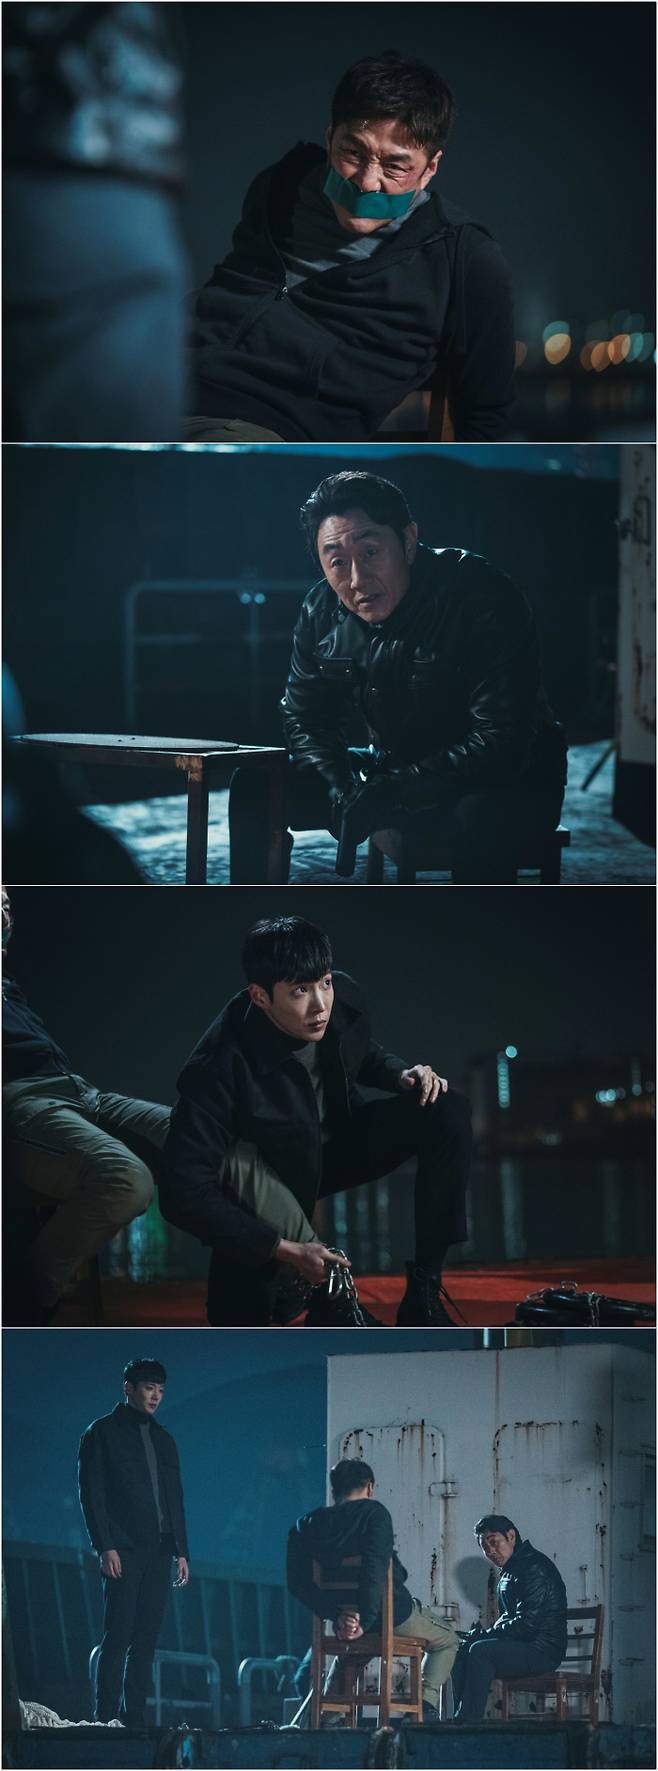 Undercover Ji Jin-hee stands at the crossroads of life and death.JTBC gilt drama Undercover (directed by Song Hyun-wook, playwright Song Ja-hoon and Baek Cheol-hyun, production by StoryTV and JTBC Studio) released the urgent appearance of Limited Express (Ji Jin-hee), which was placed on the DDanger of Desperation, on the 5th, ahead of the 14th broadcast.Lim Hyung-rak (Heo Jun-ho), who binds and threatens Limited Express, has a lively look that causes goose bumps.In the last broadcast, Choi Yeon-su (Kim Hyun-joo) and members of the airborne agency have begun investigating the flowerpot business.Park Won-jong (played by Joo Seok-tae), the head of the NIS finance division, who stole a large amount of funds, was caught, and he promised to remove the tablet PC, the decisive smoking gun, to avoid retaliation by Lim Hyung-rak.However, after Limited Express, Oh Pil-jae (Kwon Hae-hyo), and Park Won-jongs cheating, the tablet PC eventually entered the hands of Lim Hyung-rak.Meanwhile, Limited Express was hit by DDanger, who collapsed in a surprise attack by Ghost agent Chun Woo-jin (played by Kim Dong-ho), signaling an unpredictable development.In the meantime, the face of Limited Express in the public photo is distorted by pain.Unlike the previous meeting at the memorial ceremony of Kim Tae-yeol (Kim Young-dae), he took off the mask of hypocrisy and threatened his opponent with bloody eyes and revealed the true color of Billon.Limited Express is the one who revealed Lim Hyung-raks flower pot business. As Lim Hyung-raks Danger reaches its peak, it is impossible to know what he will do.The gun in Lim Hyung-raks hand, chains tied to his Limited Express ankle, and the black river running behind him, which is completely encased, suggest the cliff-end DDanger of Limited Express.Indeed, he is drawing attention to how he will escape this DDanger.In the 14th episode, which airs today (5th), Limited Express is threatened by Lim Hyung-rak, and Choi Yeon-su, who is stimulated by it, declares war on the front and will pay the price.The team of Undercover said, Im Hyung-raks ruthless attack on the life of Limited Express will take place.We will have an exciting development that will continue to counterattack and reverse with Choi Yeon-su added here.Meanwhile, the 14th episode of Undercover will air on JTBC at 11 p.m. today (5th).